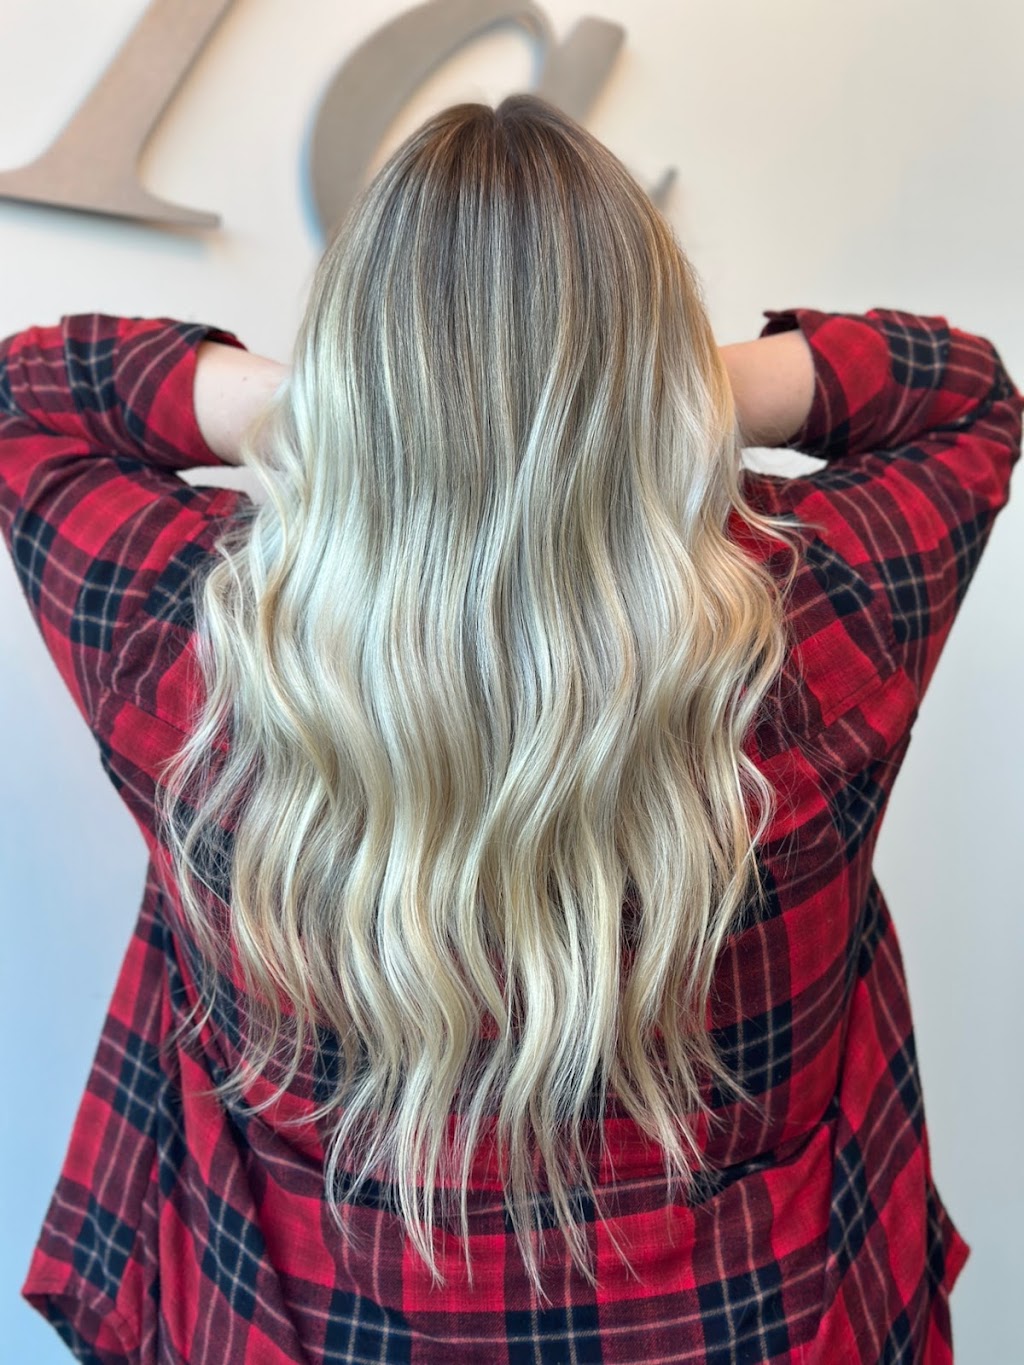 Hair By Taylor Force - Extension Specialist | 4779 Sunrise Hwy, Bohemia, NY 11716 | Phone: (631) 825-9997